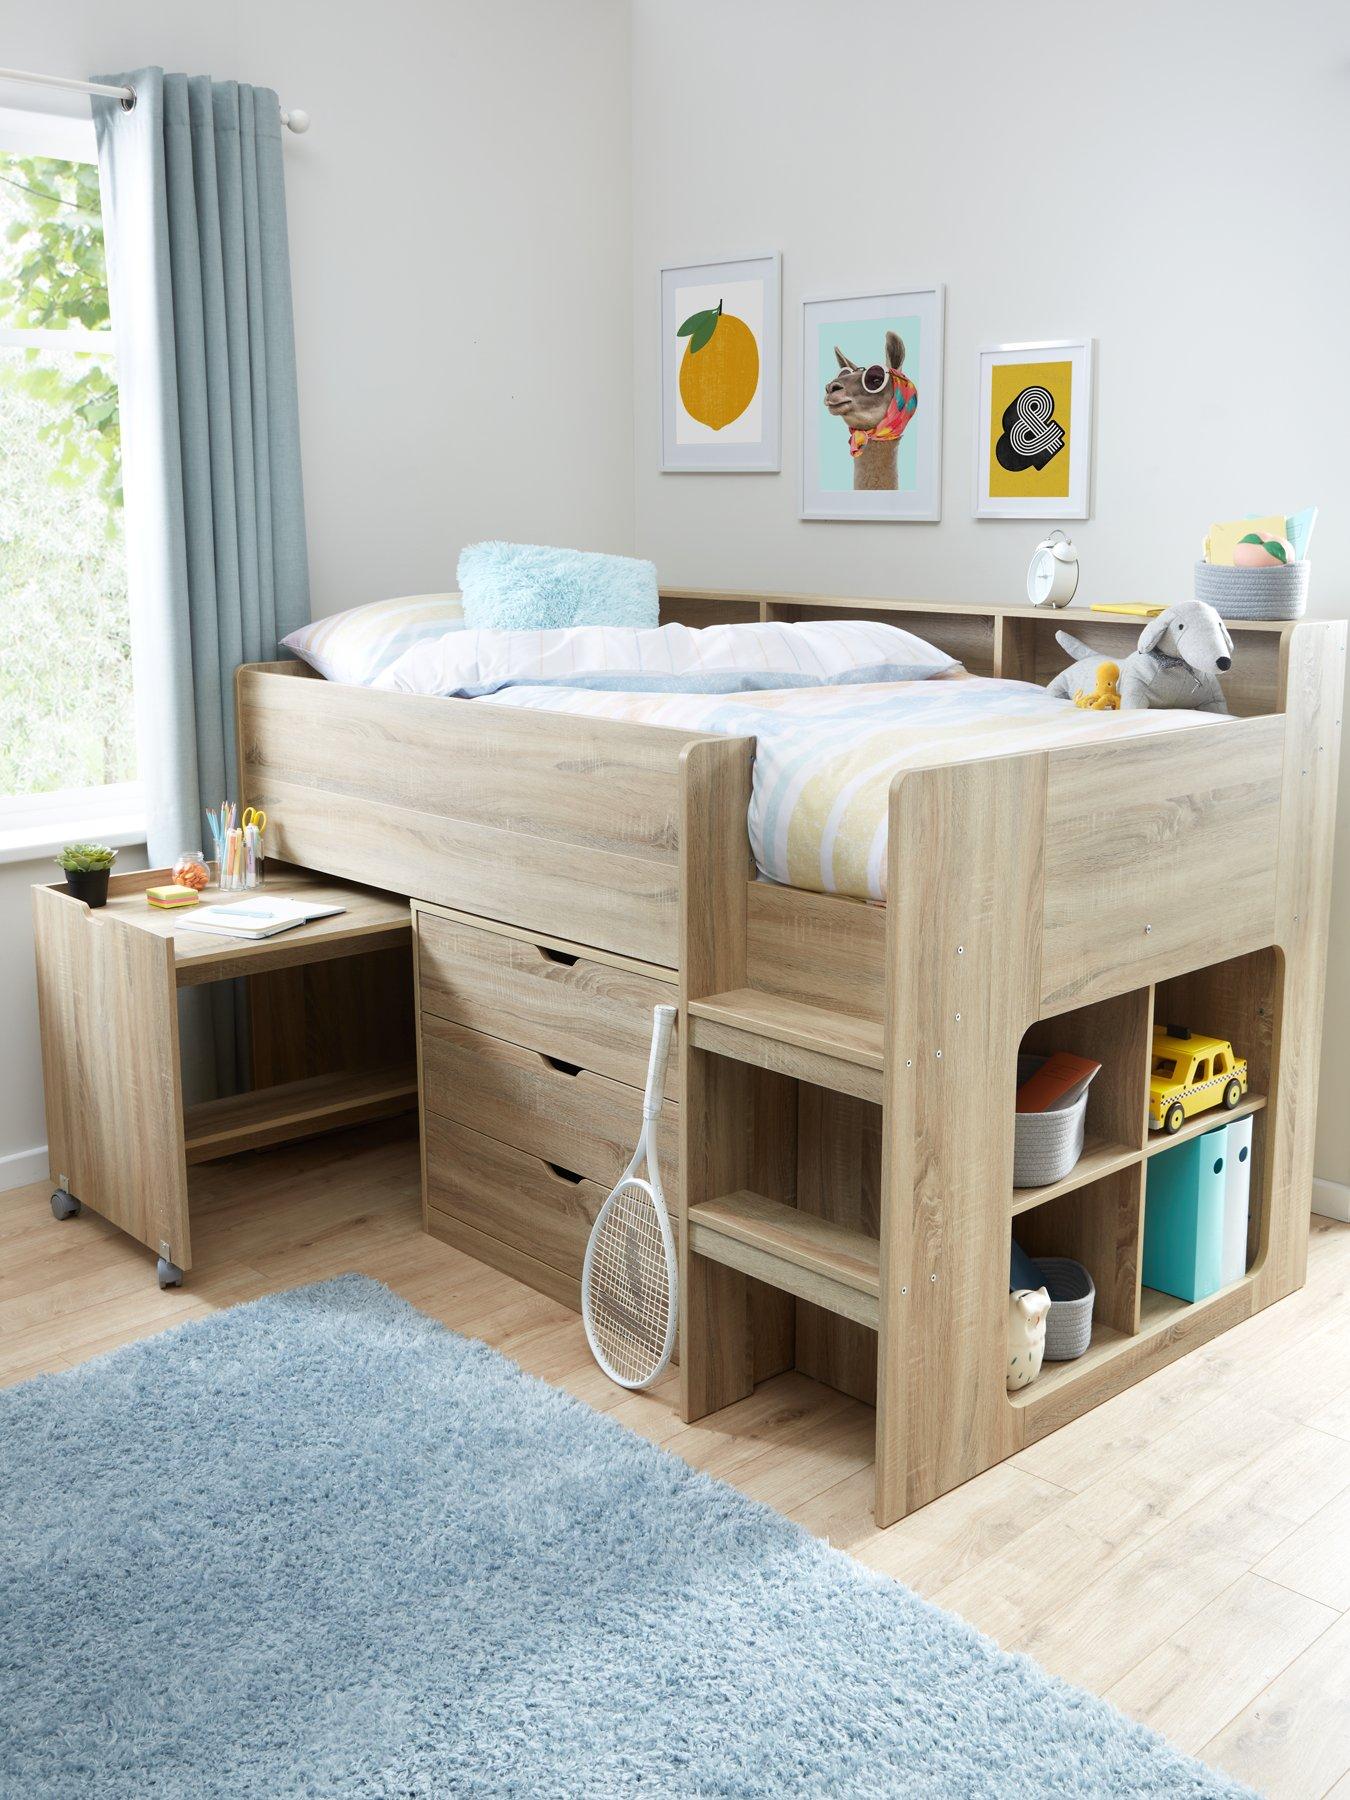 Very Home Aspen Mid Sleeper Bed Frame With Desk, Drawers And Shelves Plus Mattress Options (Buy And Save!) - Natural - Bed Frame With Premium Mattress